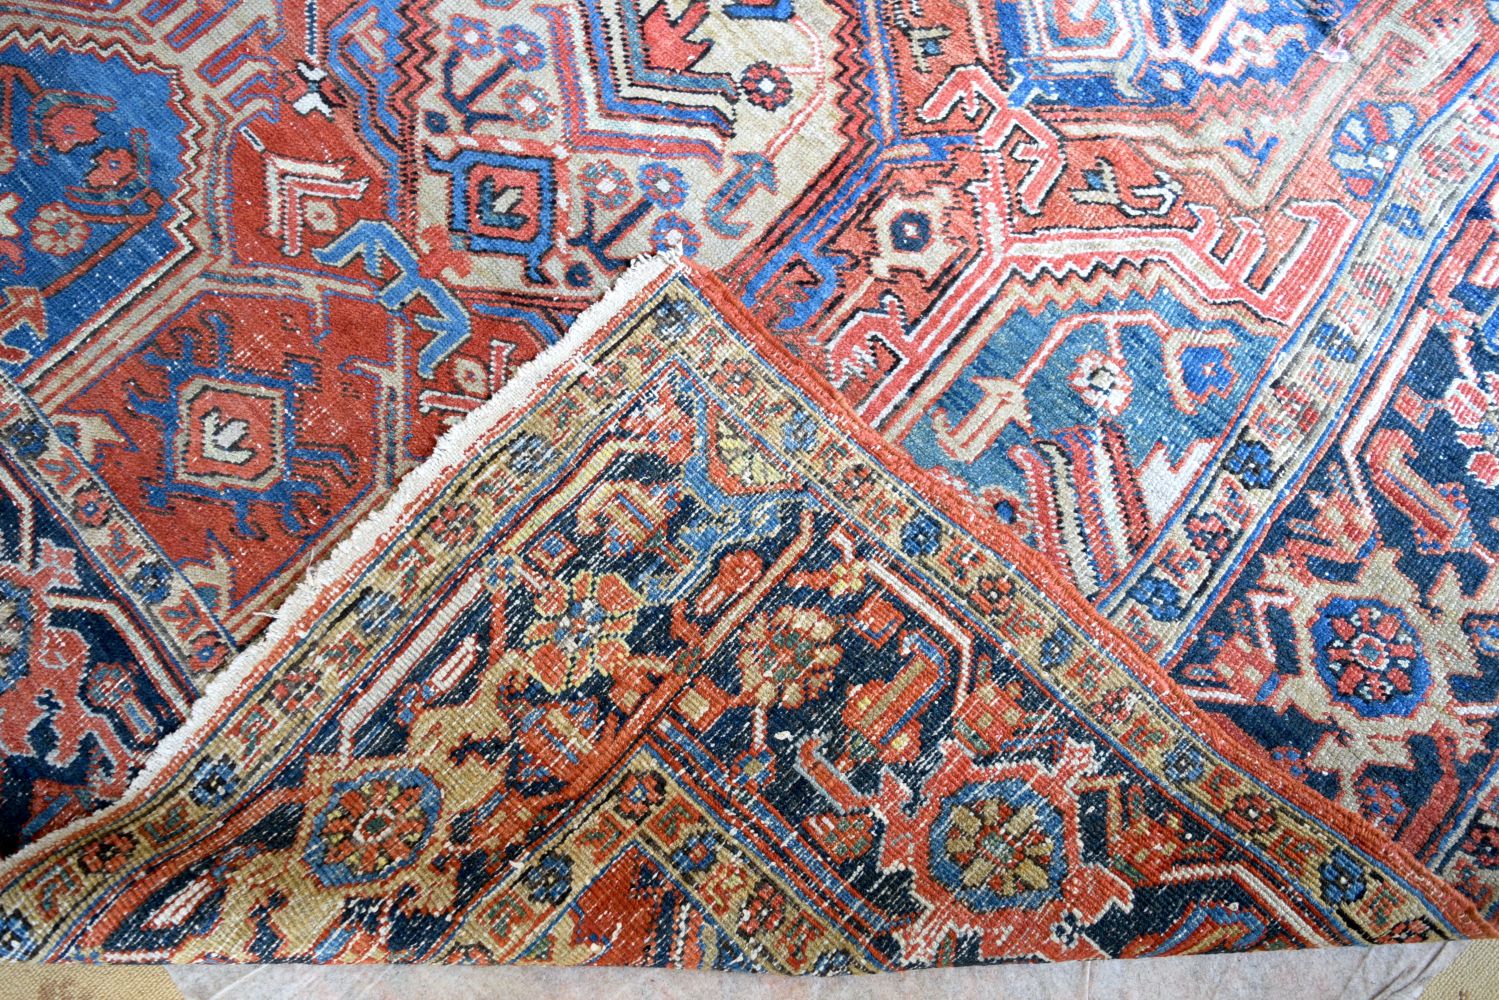 AN ANTIQUE MIDDLE EASTERN CARPET decorated with motifs on a red and blue ground. 300 cm x 195 cm. - Image 3 of 6